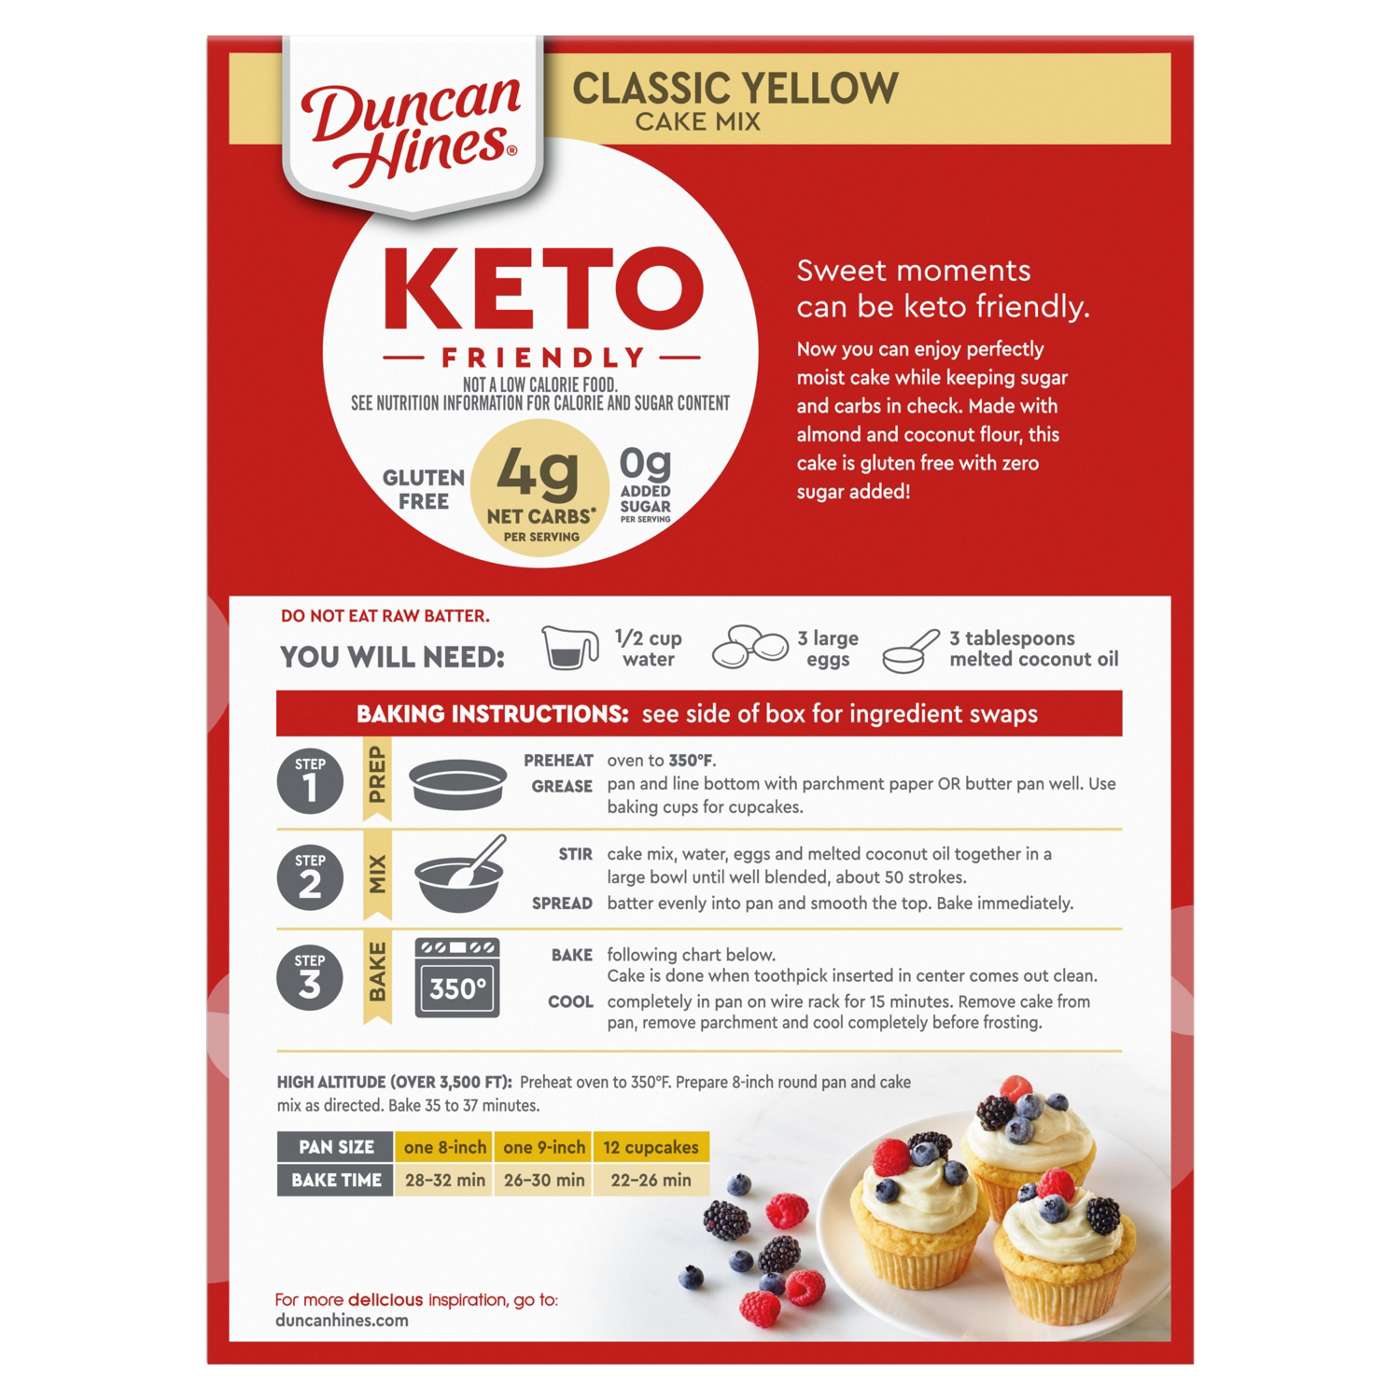 Duncan Hines Keto Friendly Gluten Free Classic Yellow Cake Mix; image 6 of 7